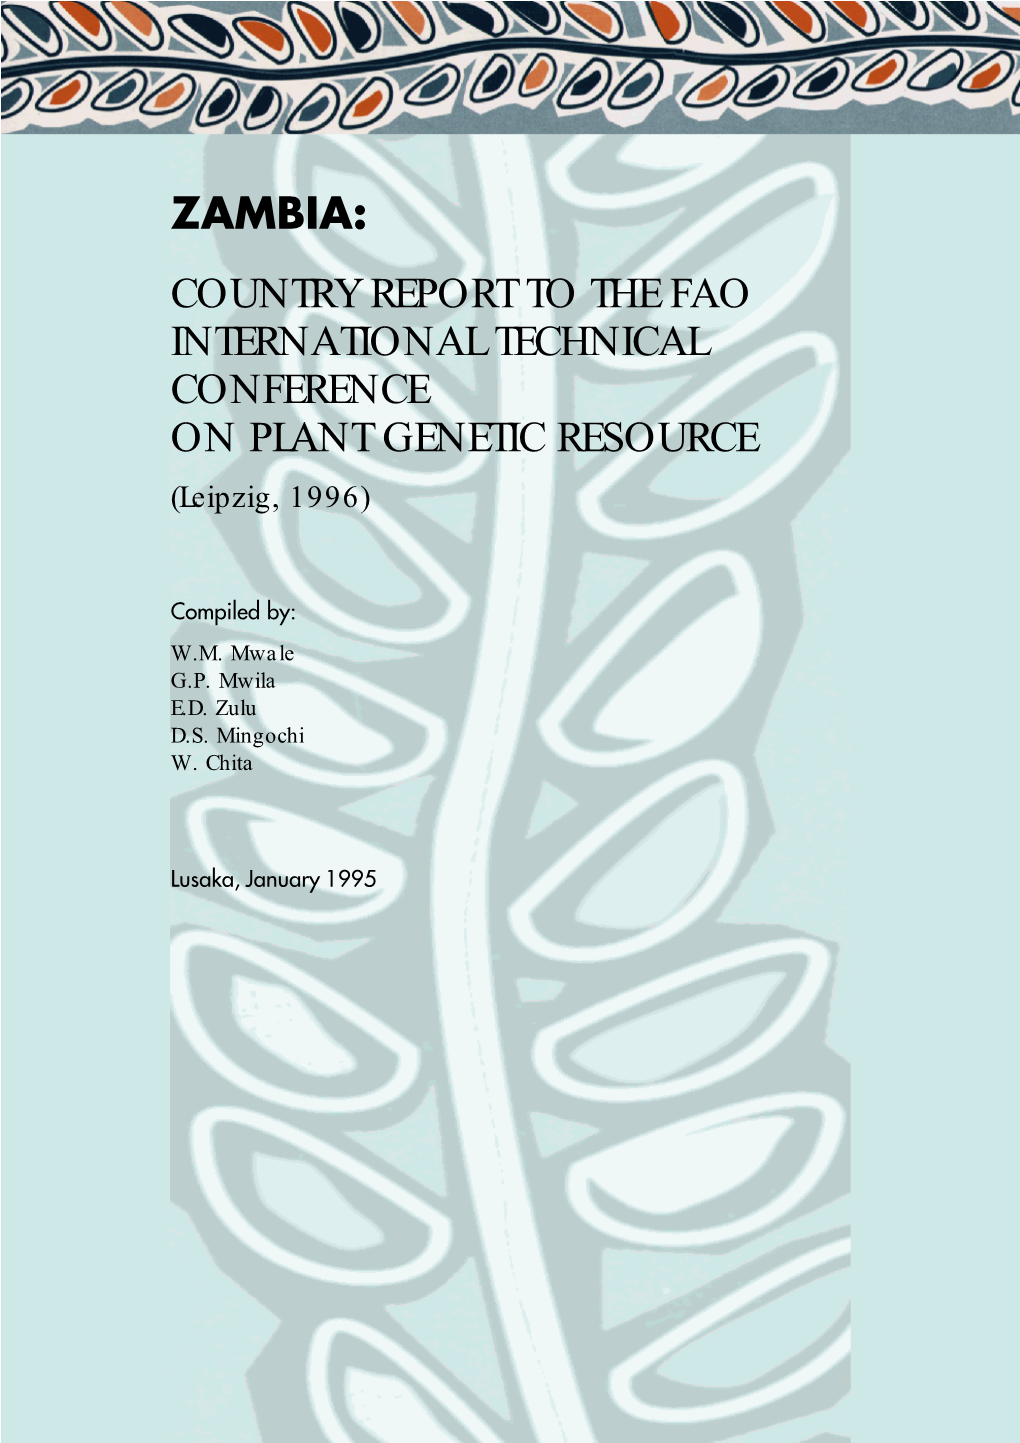 ZAMBIA: COUNTRY REPORT to the FAO INTERNATIONAL TECHNICAL CONFERENCE on PLANT GENETIC RESOURCE (Leipzig, 1996)